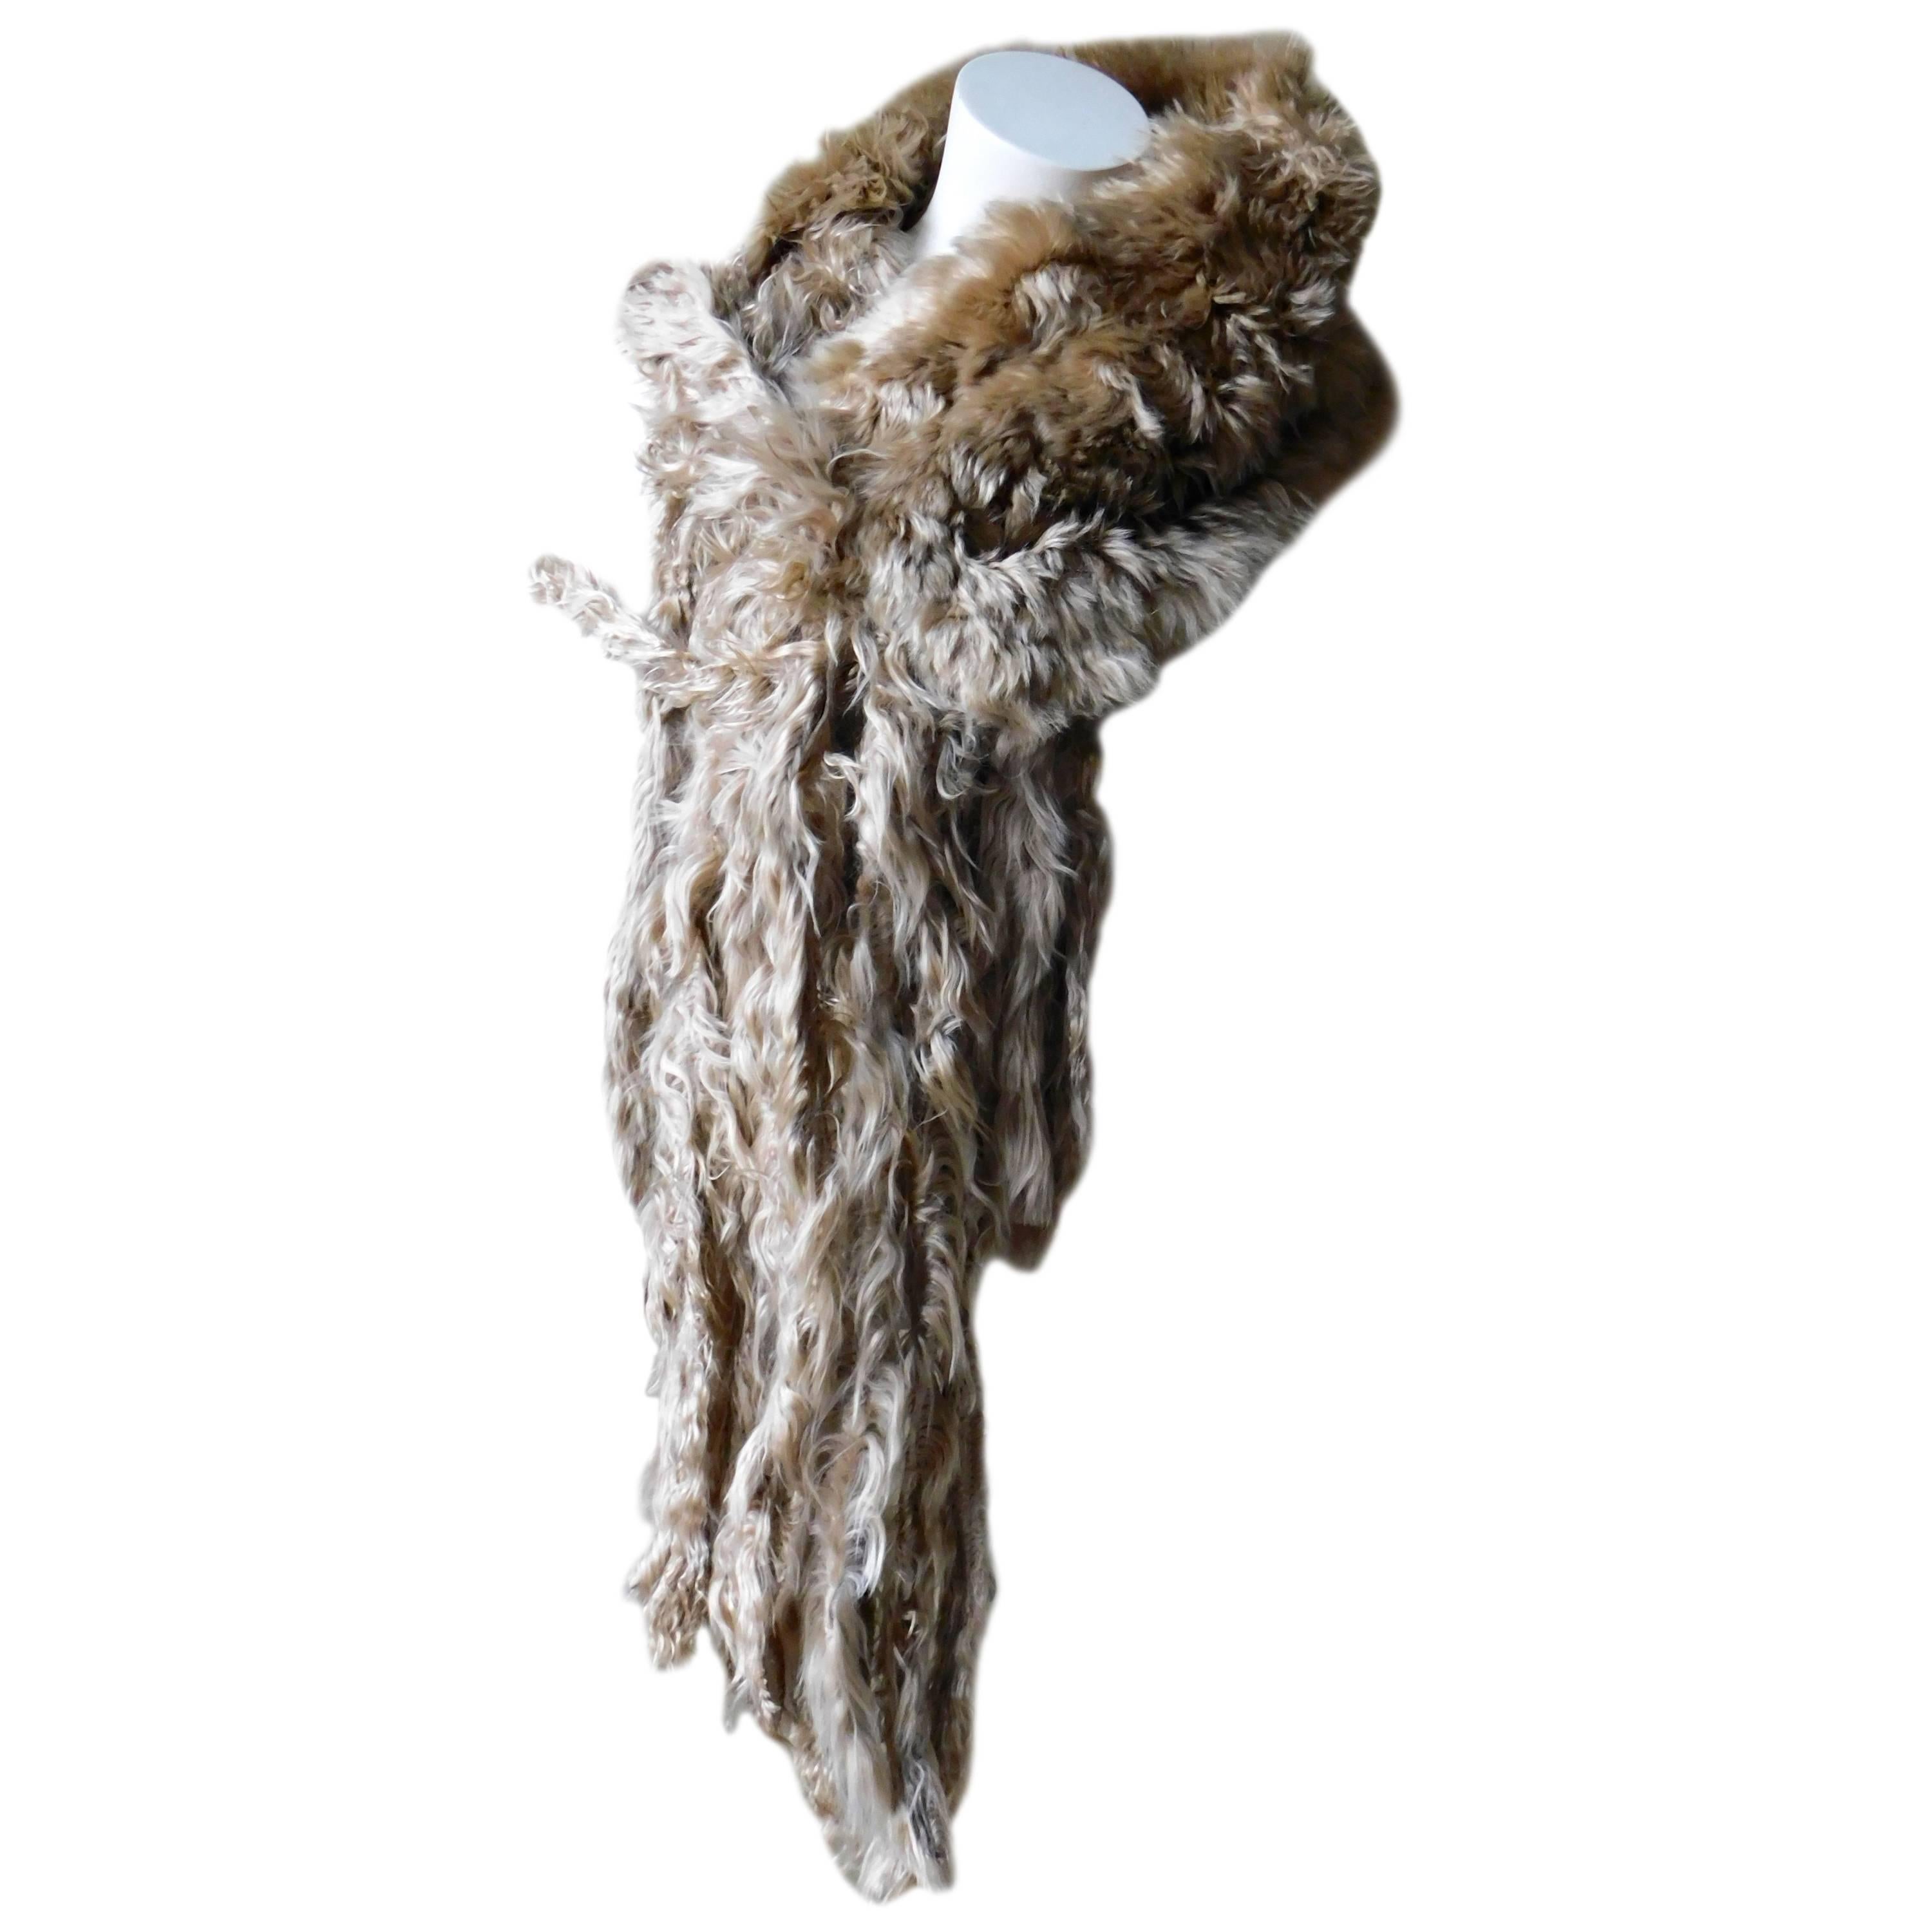 Luxurious unisex llama fur wrap shawl by the edgy Belgian designer 
Ann Demeulemeester.
Very silky soft and luminous in very good condition, the skin is double folded so there is no inside or outside. The long fur fringe makes it possible to tie in